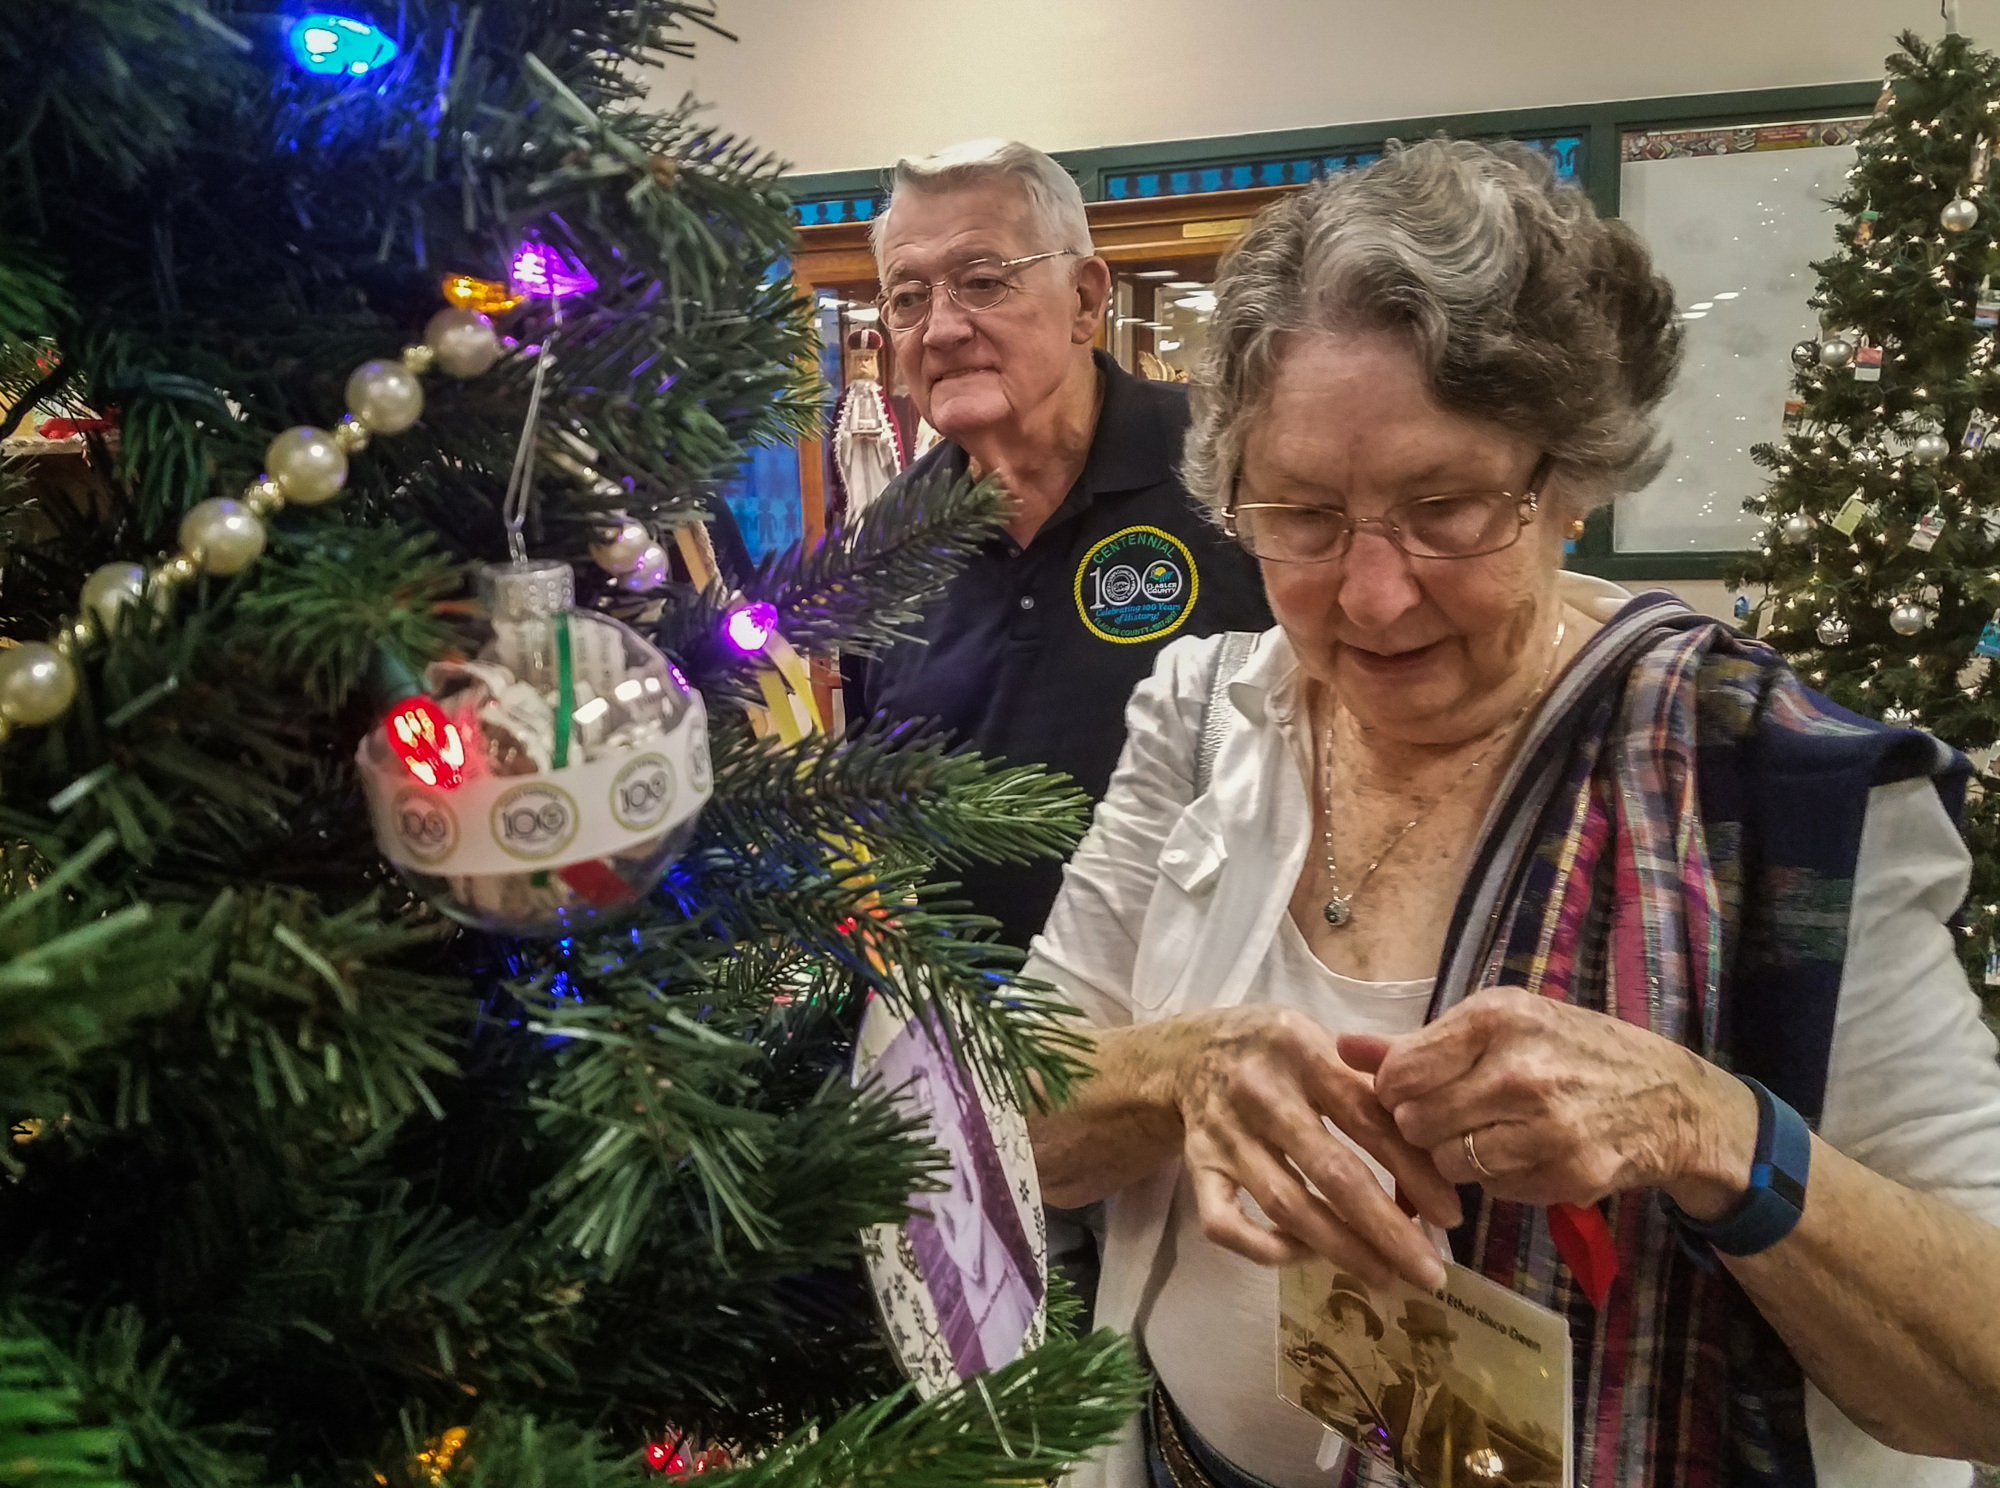 Sisco and Gloria Deen look at the centennial-themed tree. Photo courtesy of Julie Murphy